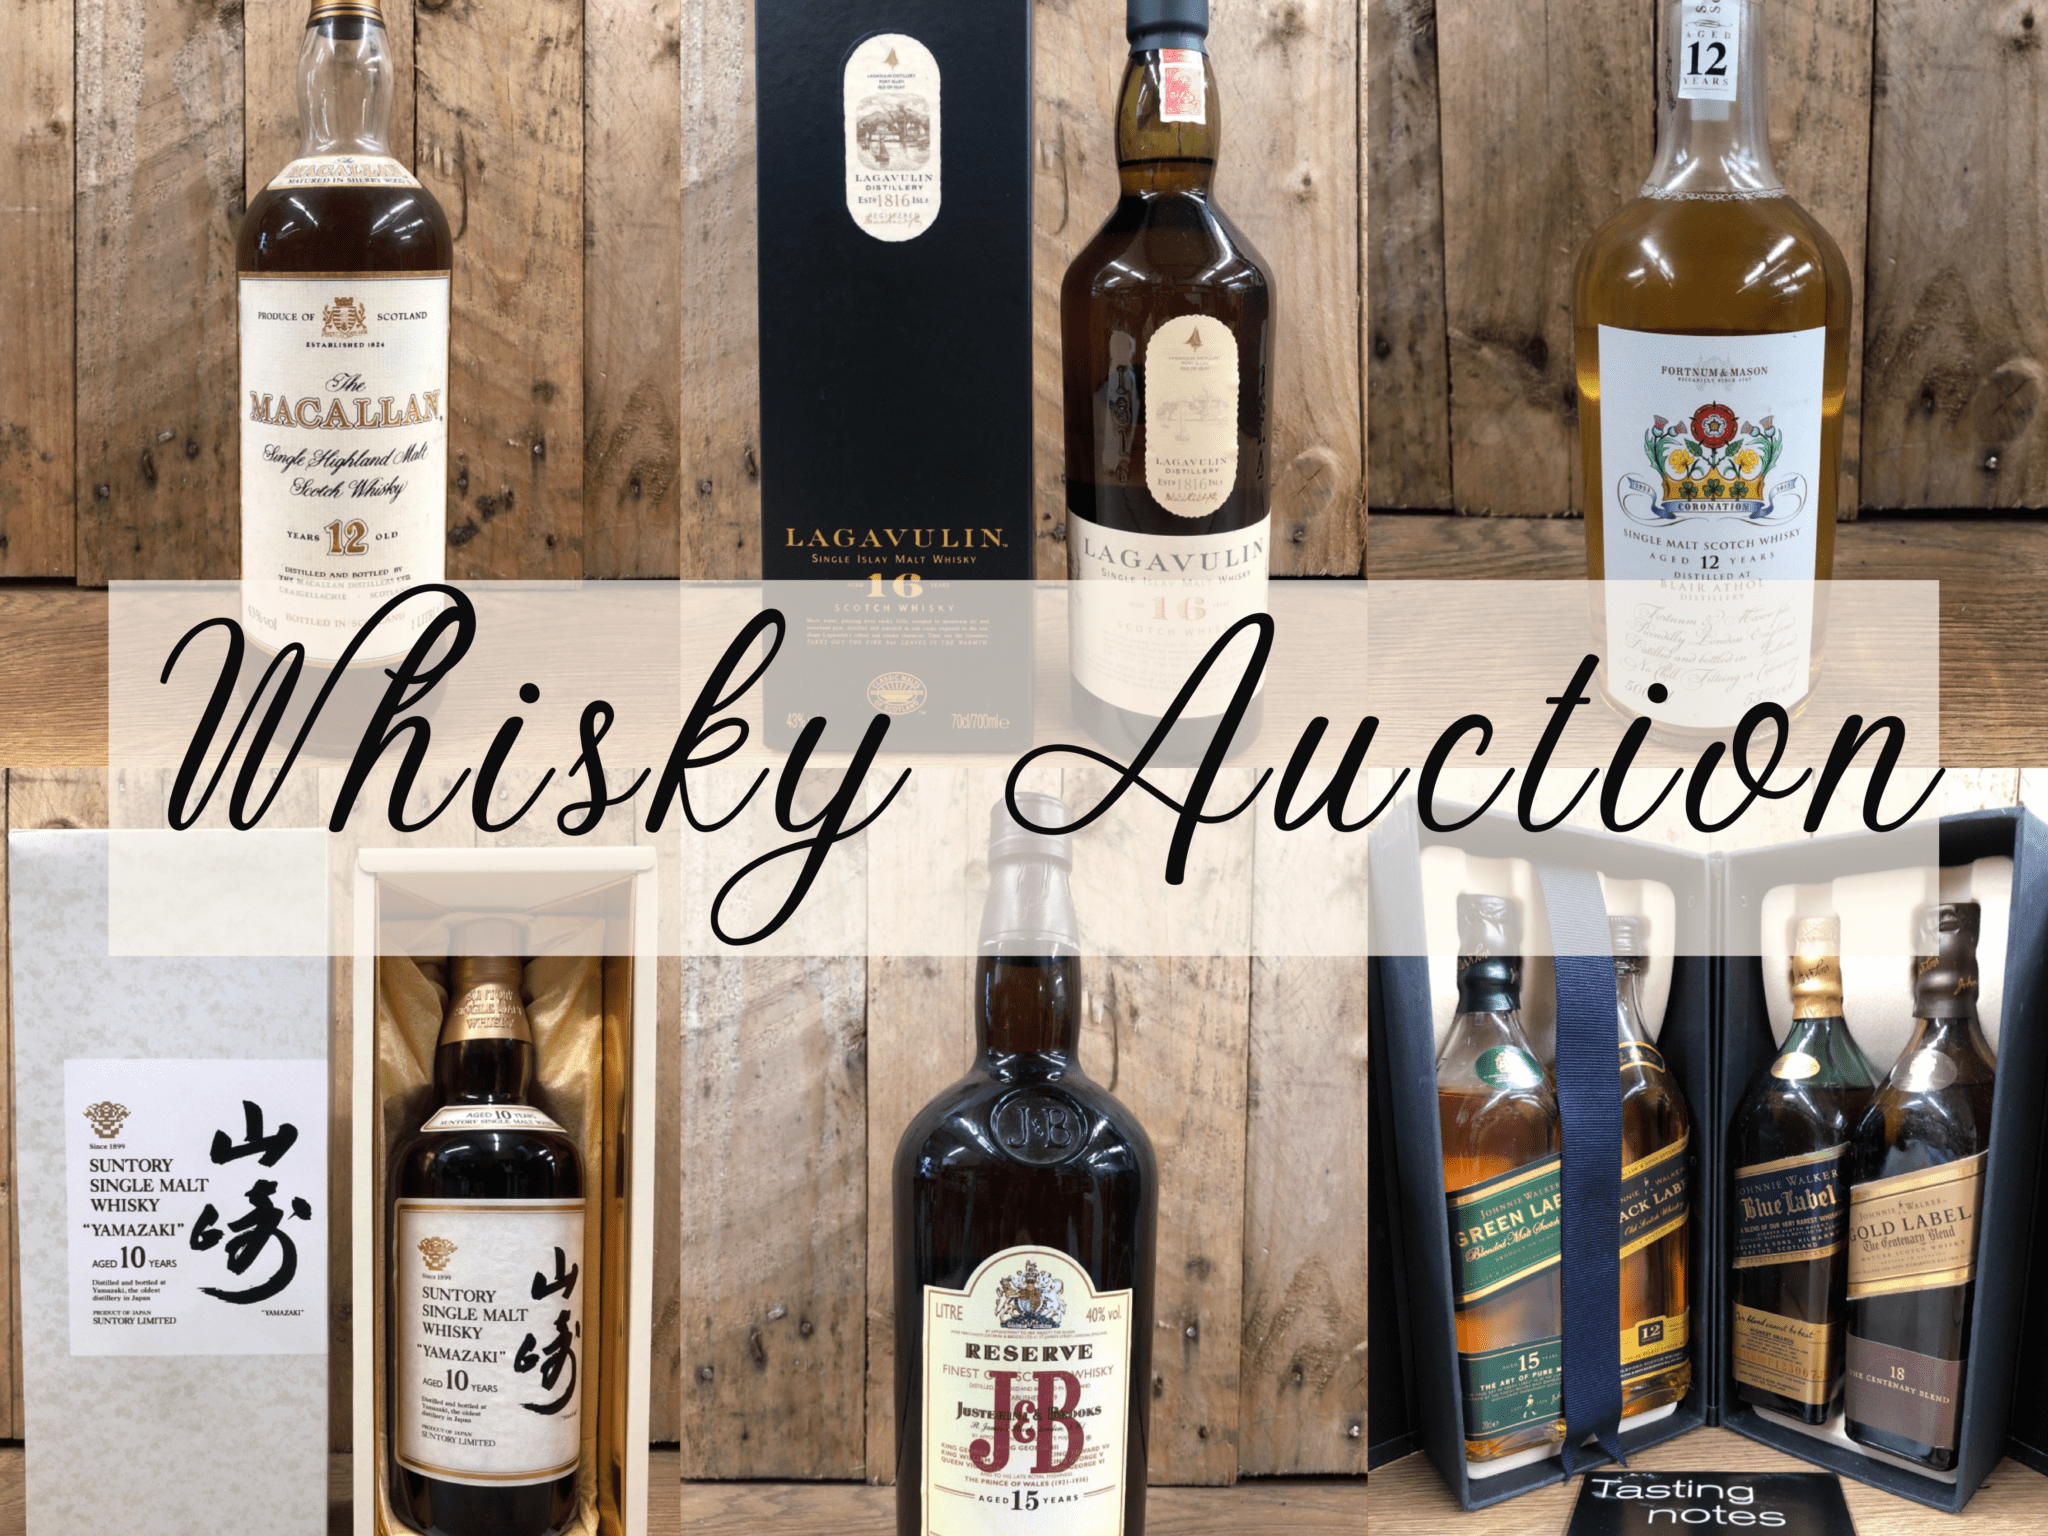 Whiskey News Image 1 Wellers Auctions